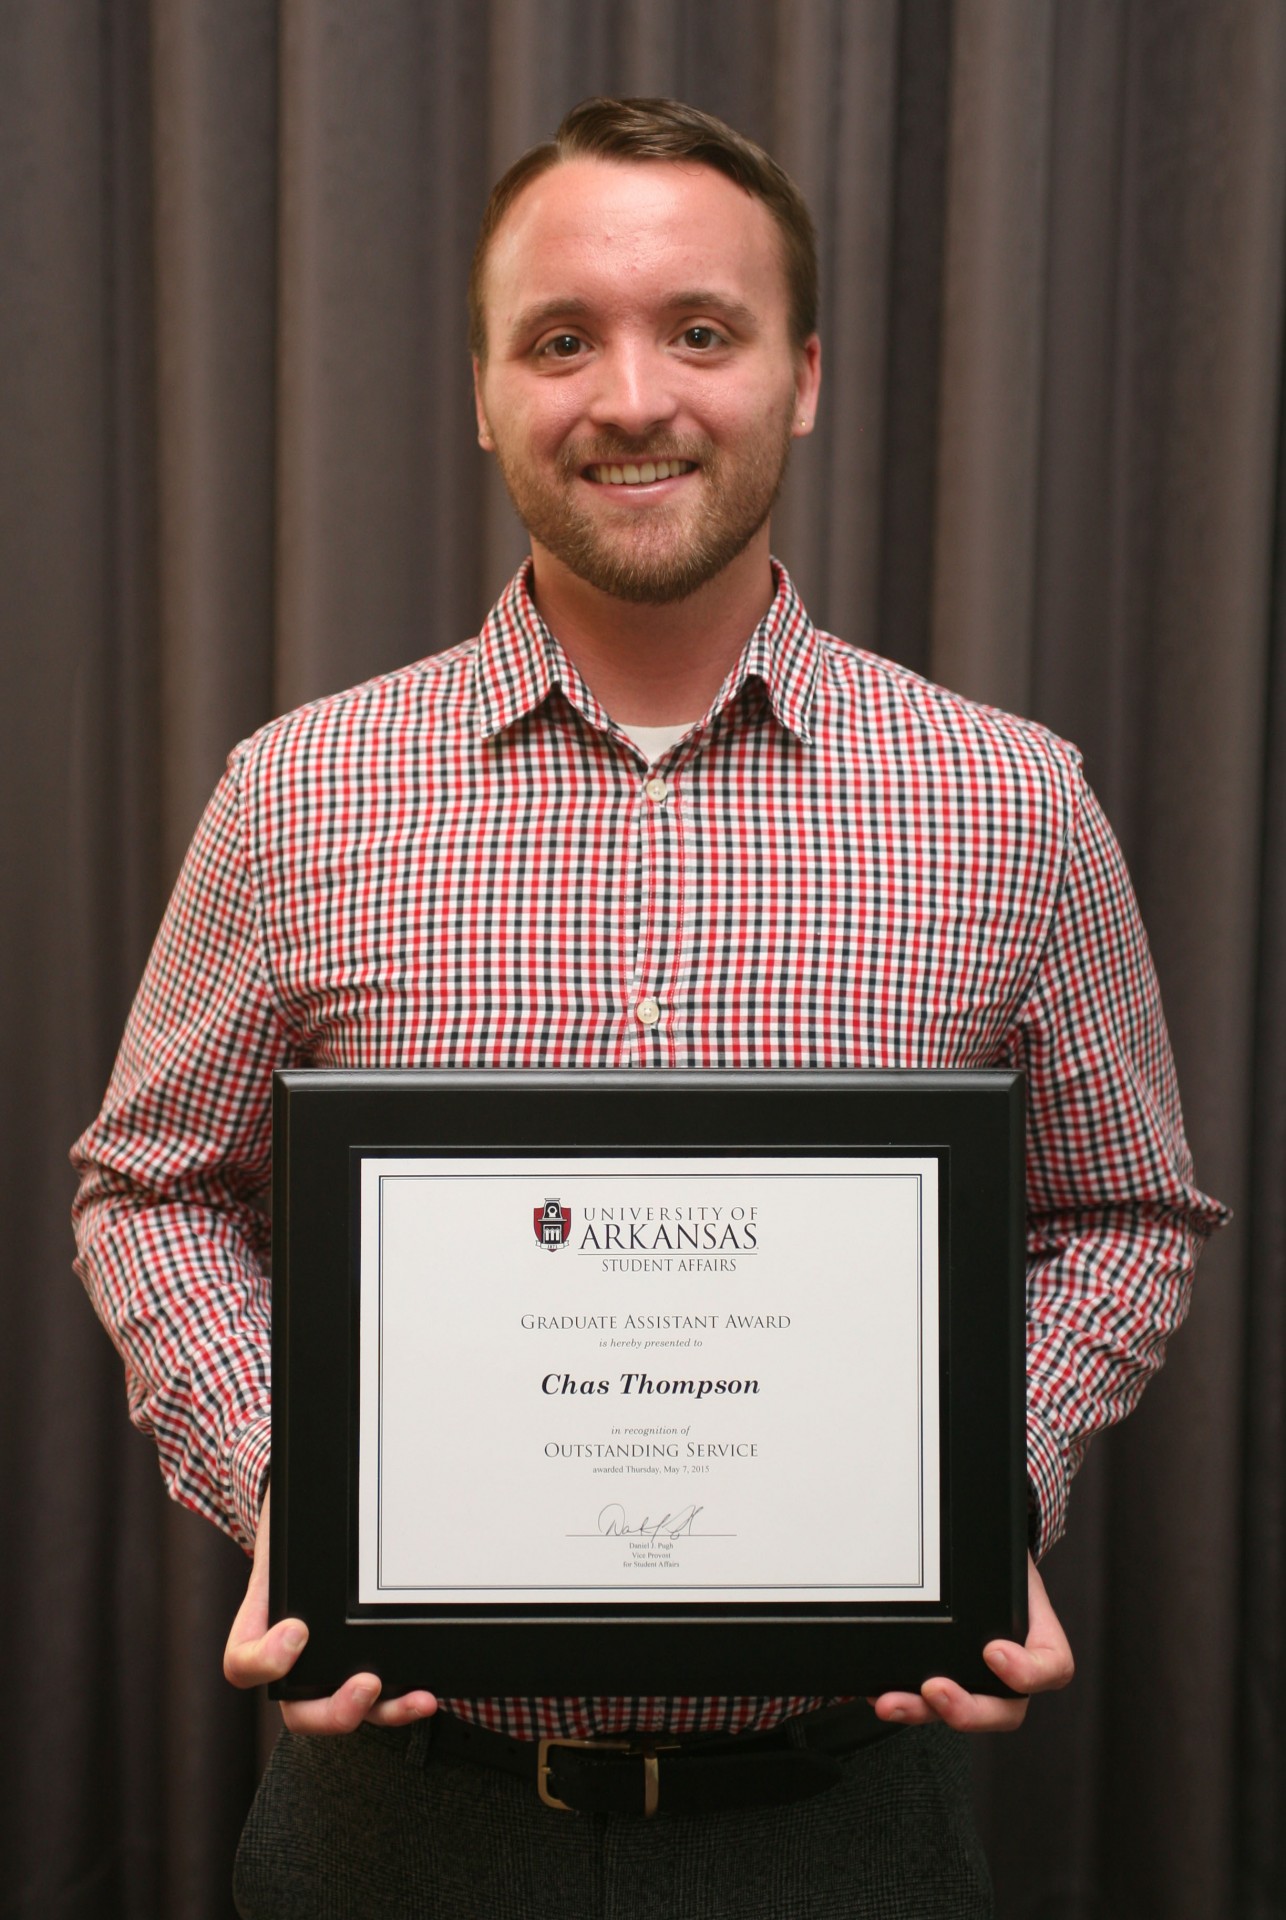 Chas Thompson received the Outstanding Graduate Assistant Award for 2014-2015.